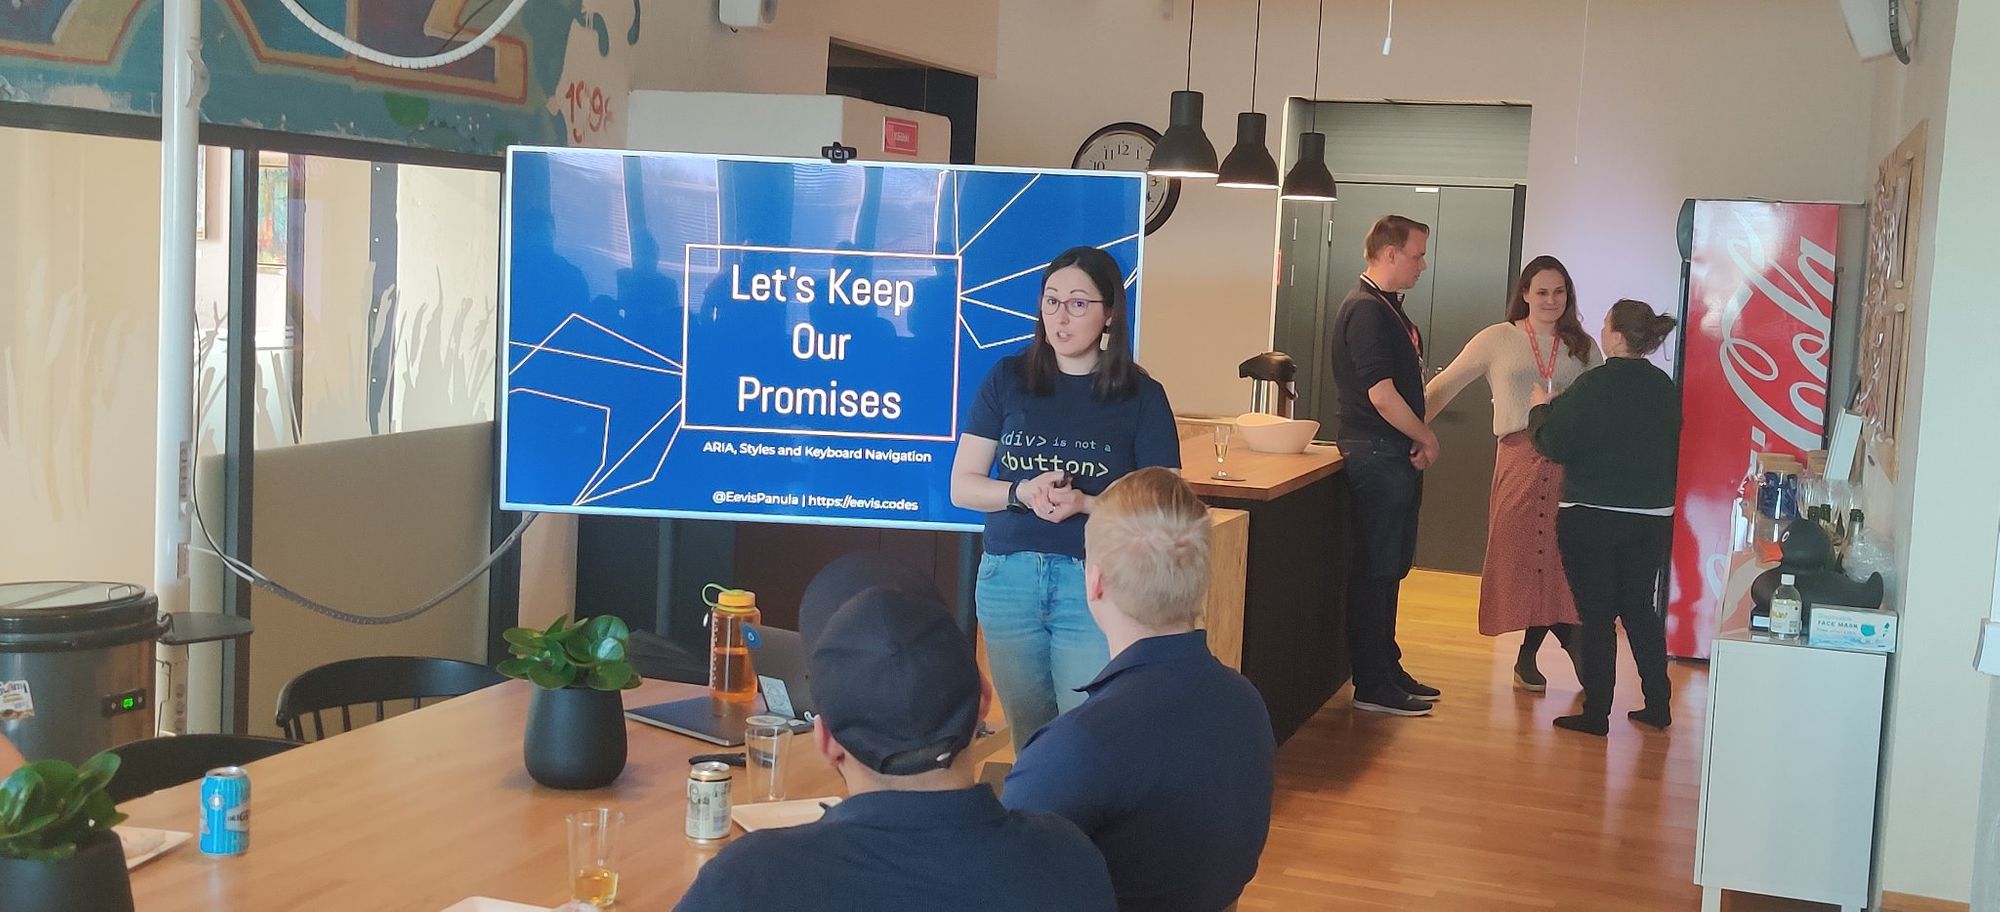 Eevis speaking in front of meetup audience with a slide that says "Let's keep our promises"